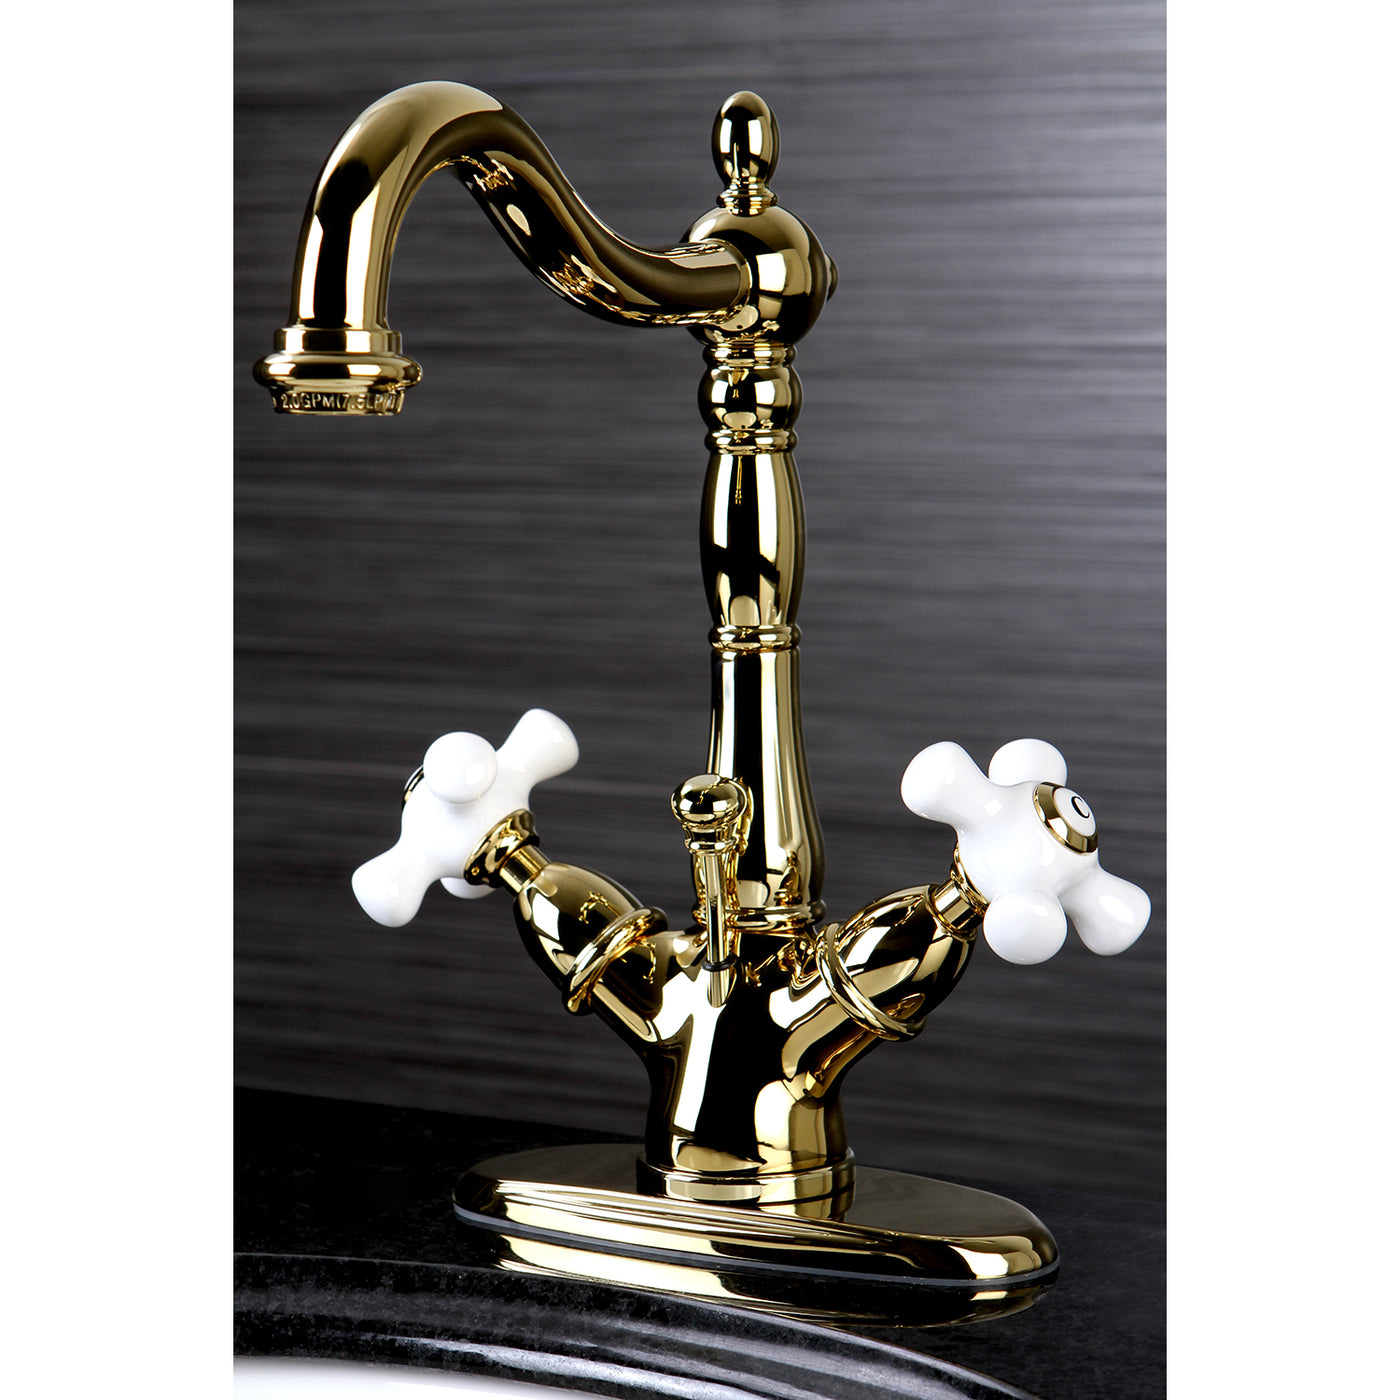 Elements of Design ES1432PX Two-Handle Bathroom Faucet with Brass Pop-Up, Polished Brass